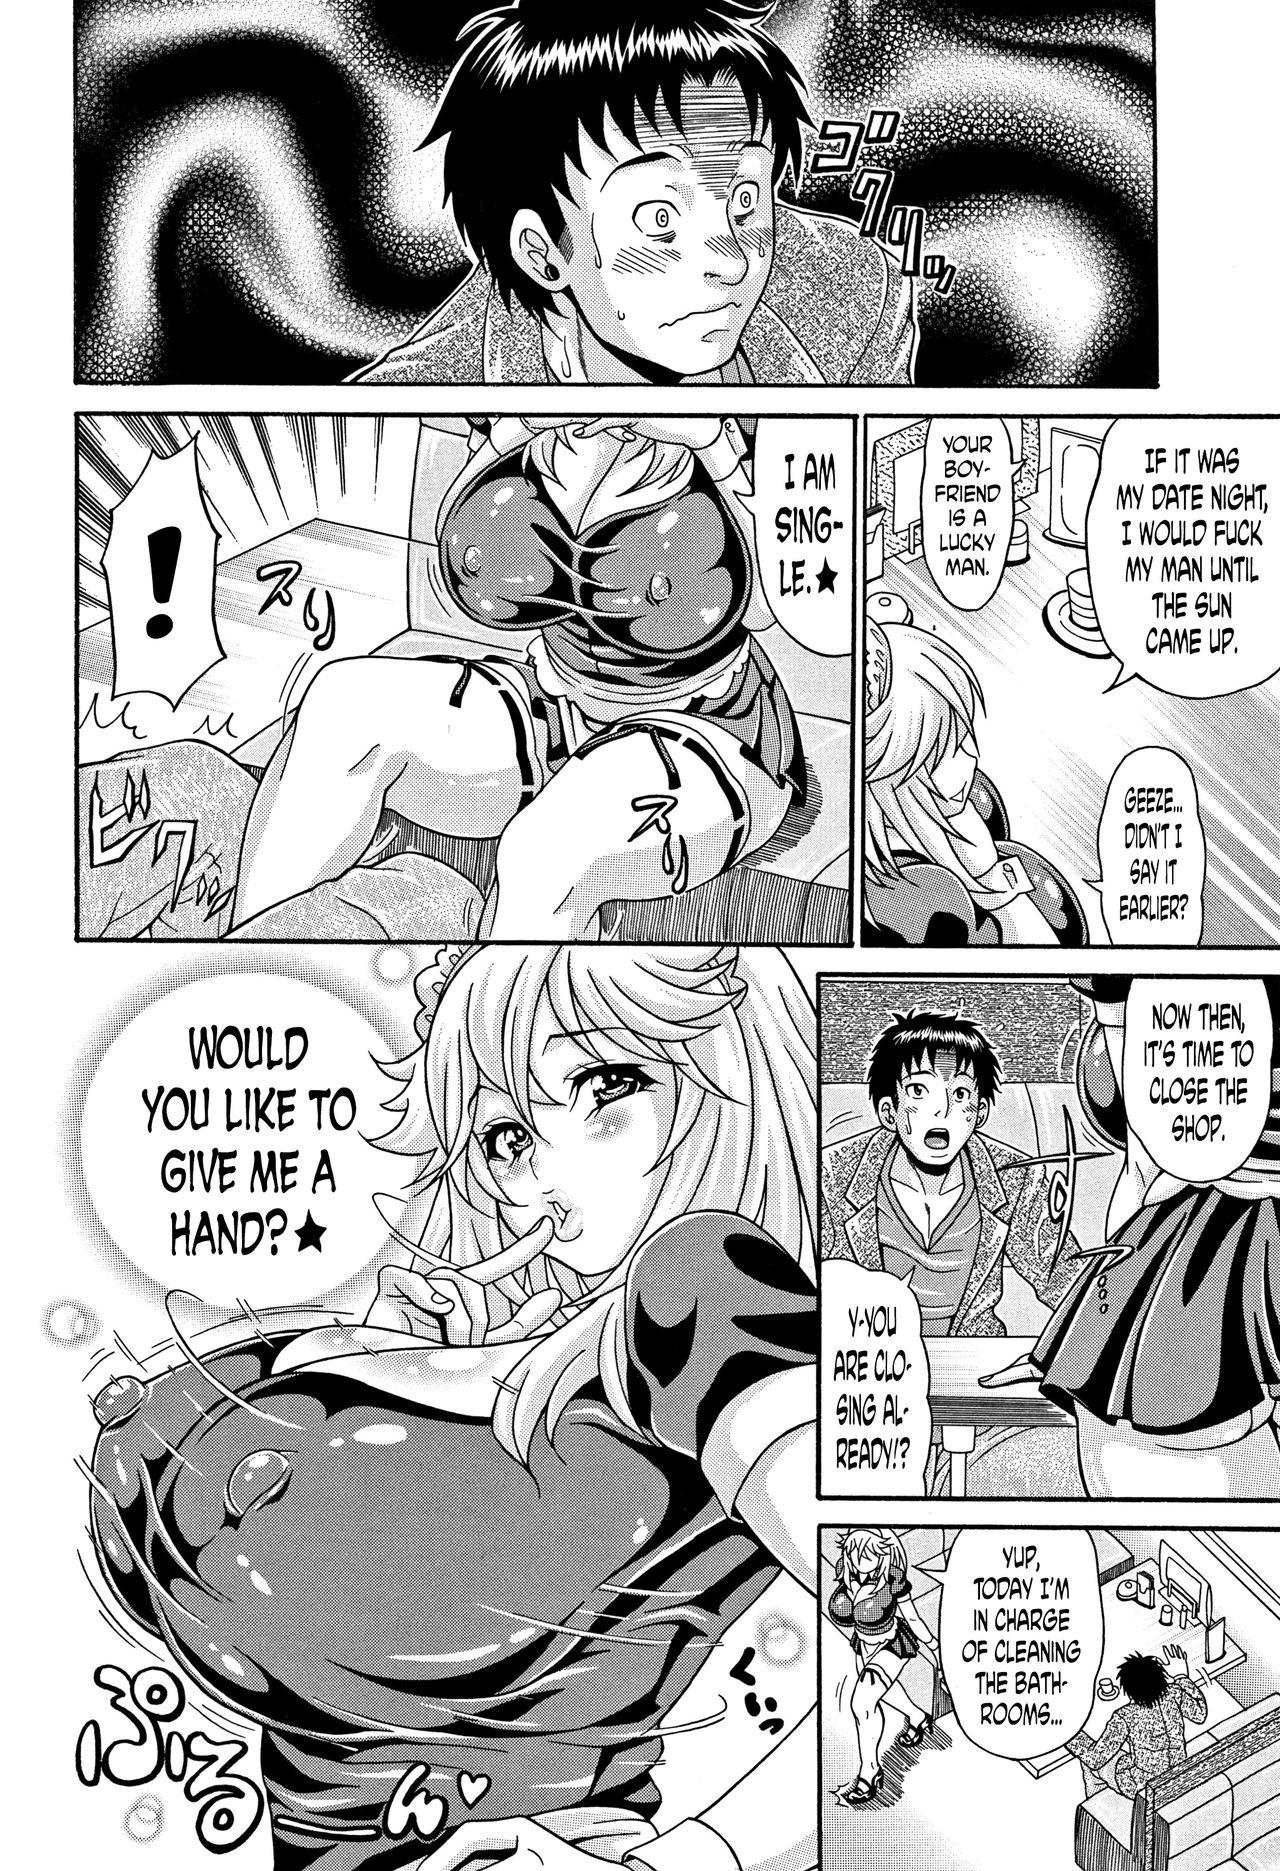 [Andou Hiroyuki] Mamire Chichi - Sticky Tits Feel Hot All Over. Ch.1-5 [English] [doujin-moe.us] 76